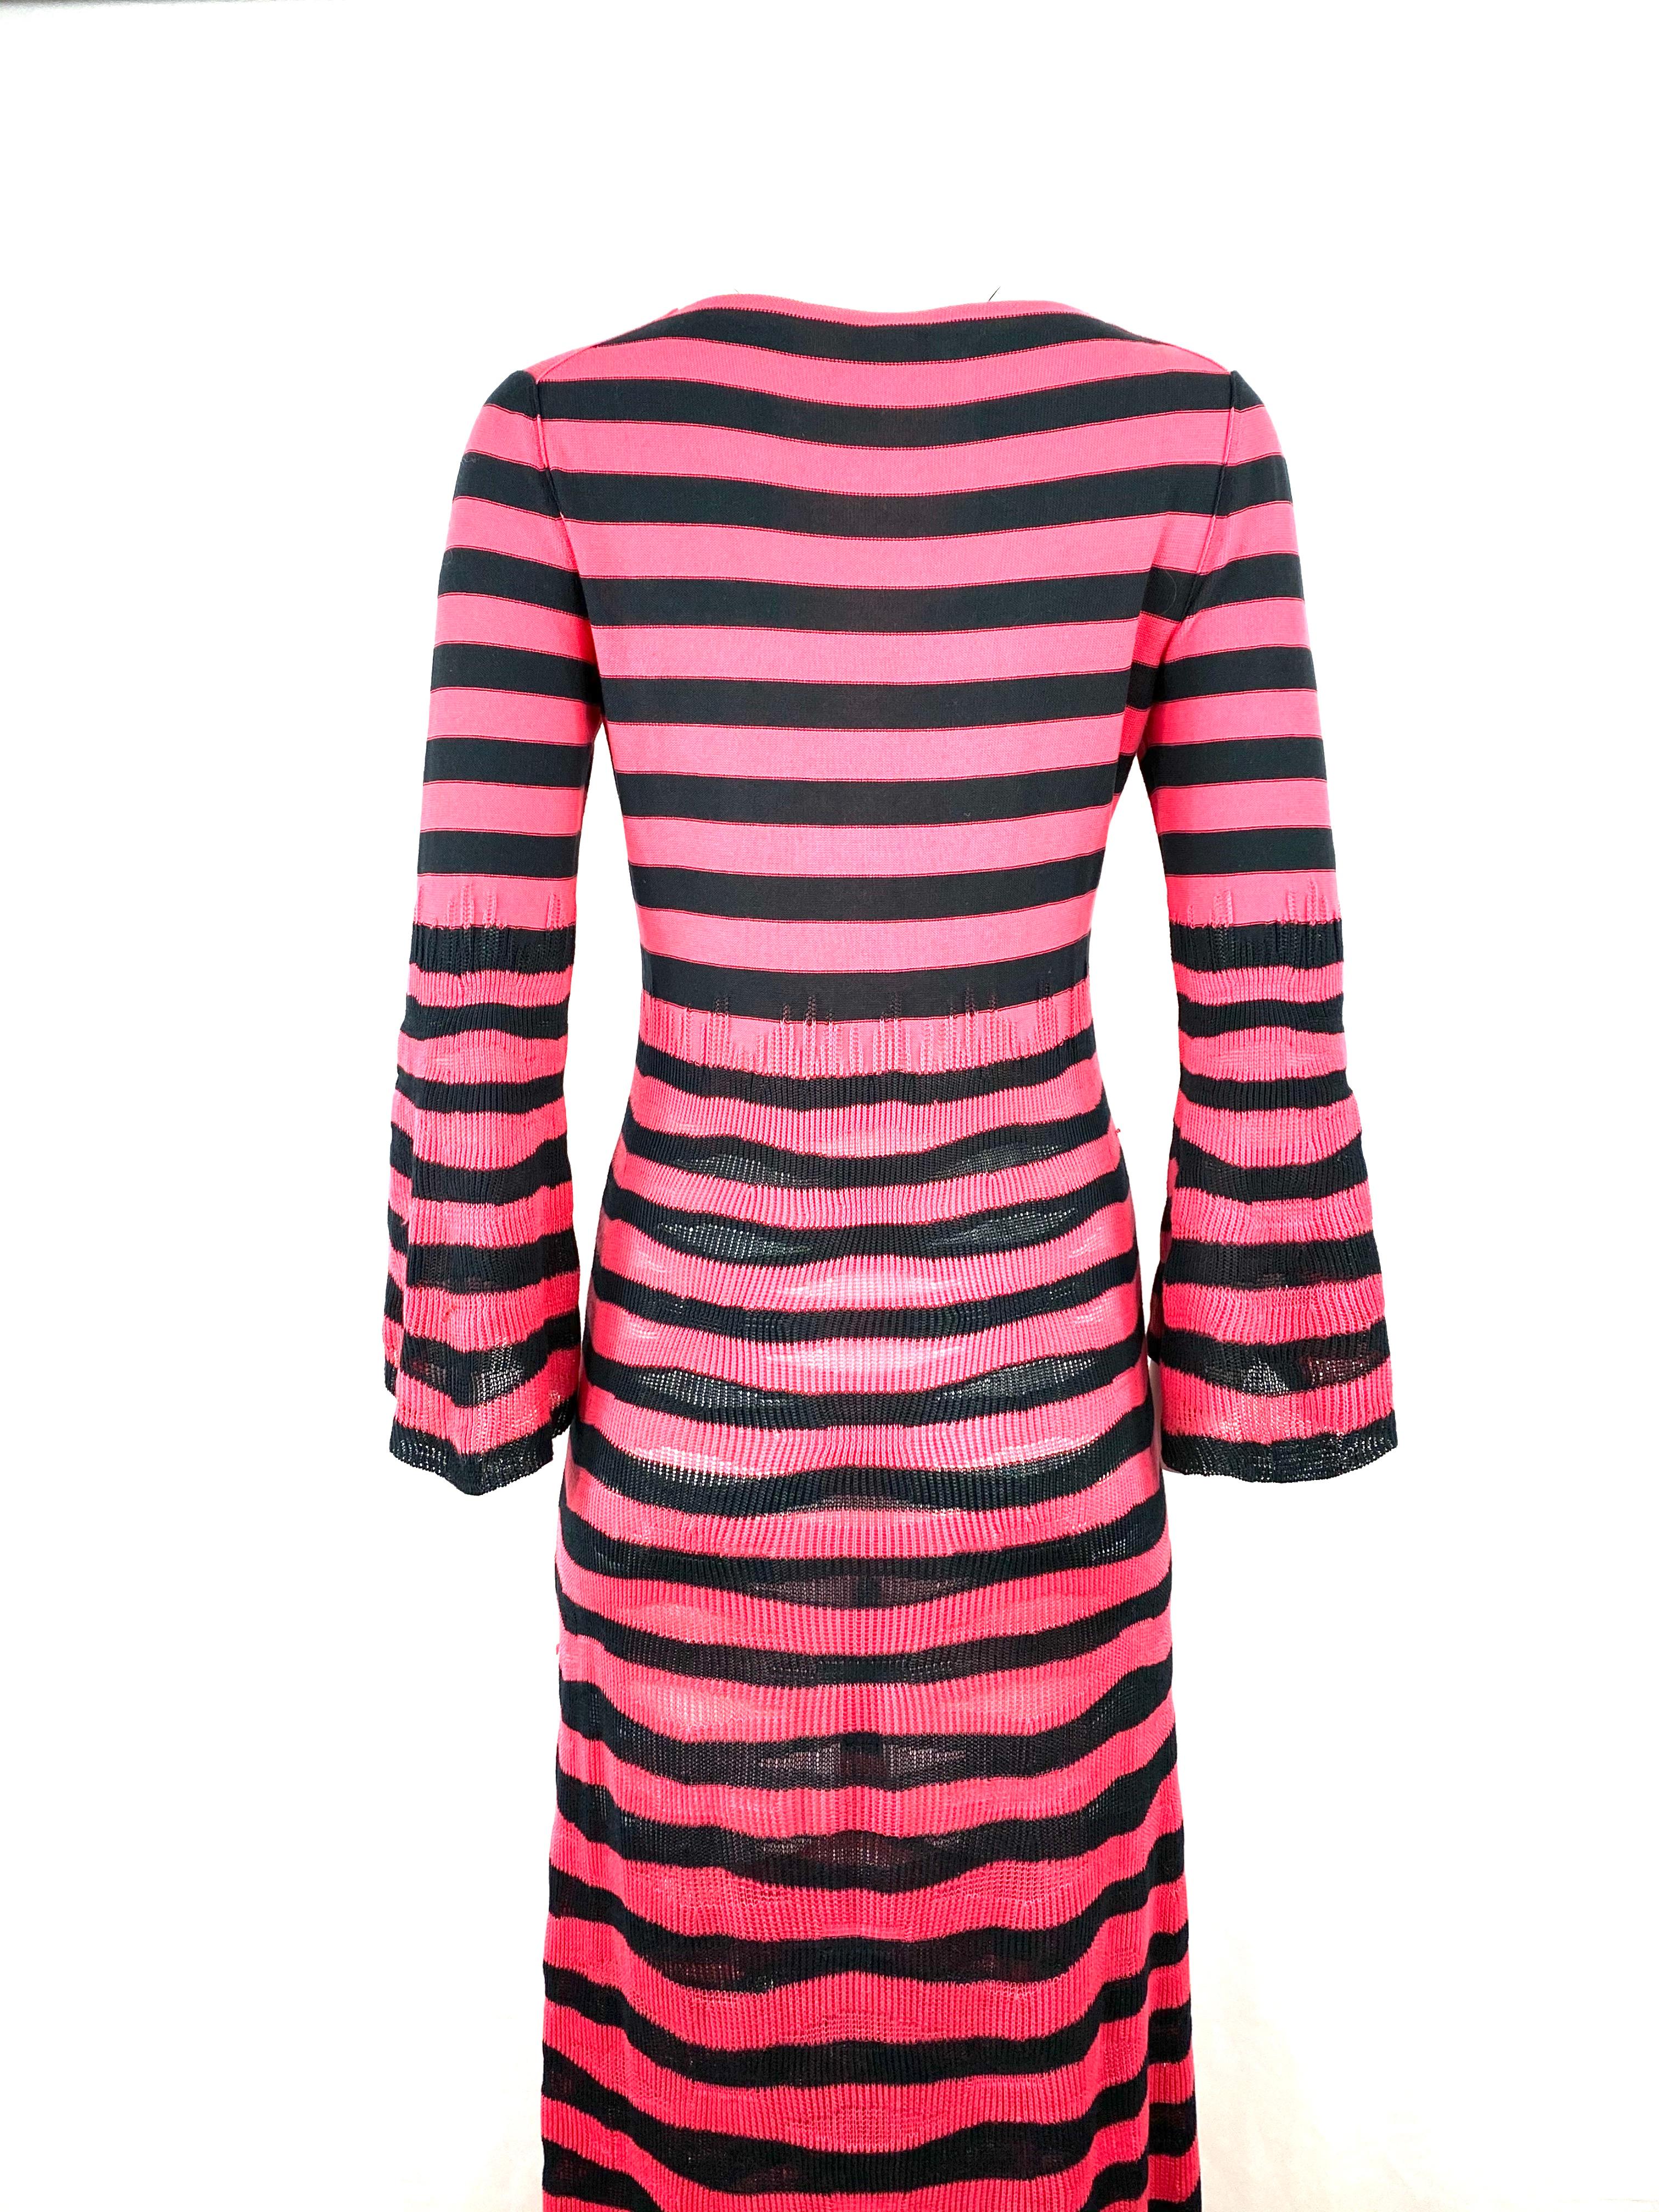 Sonia Rykiel Paris Pink and Navy Striped Maxi Dress w/ Flower Brooch Size 38 For Sale 4